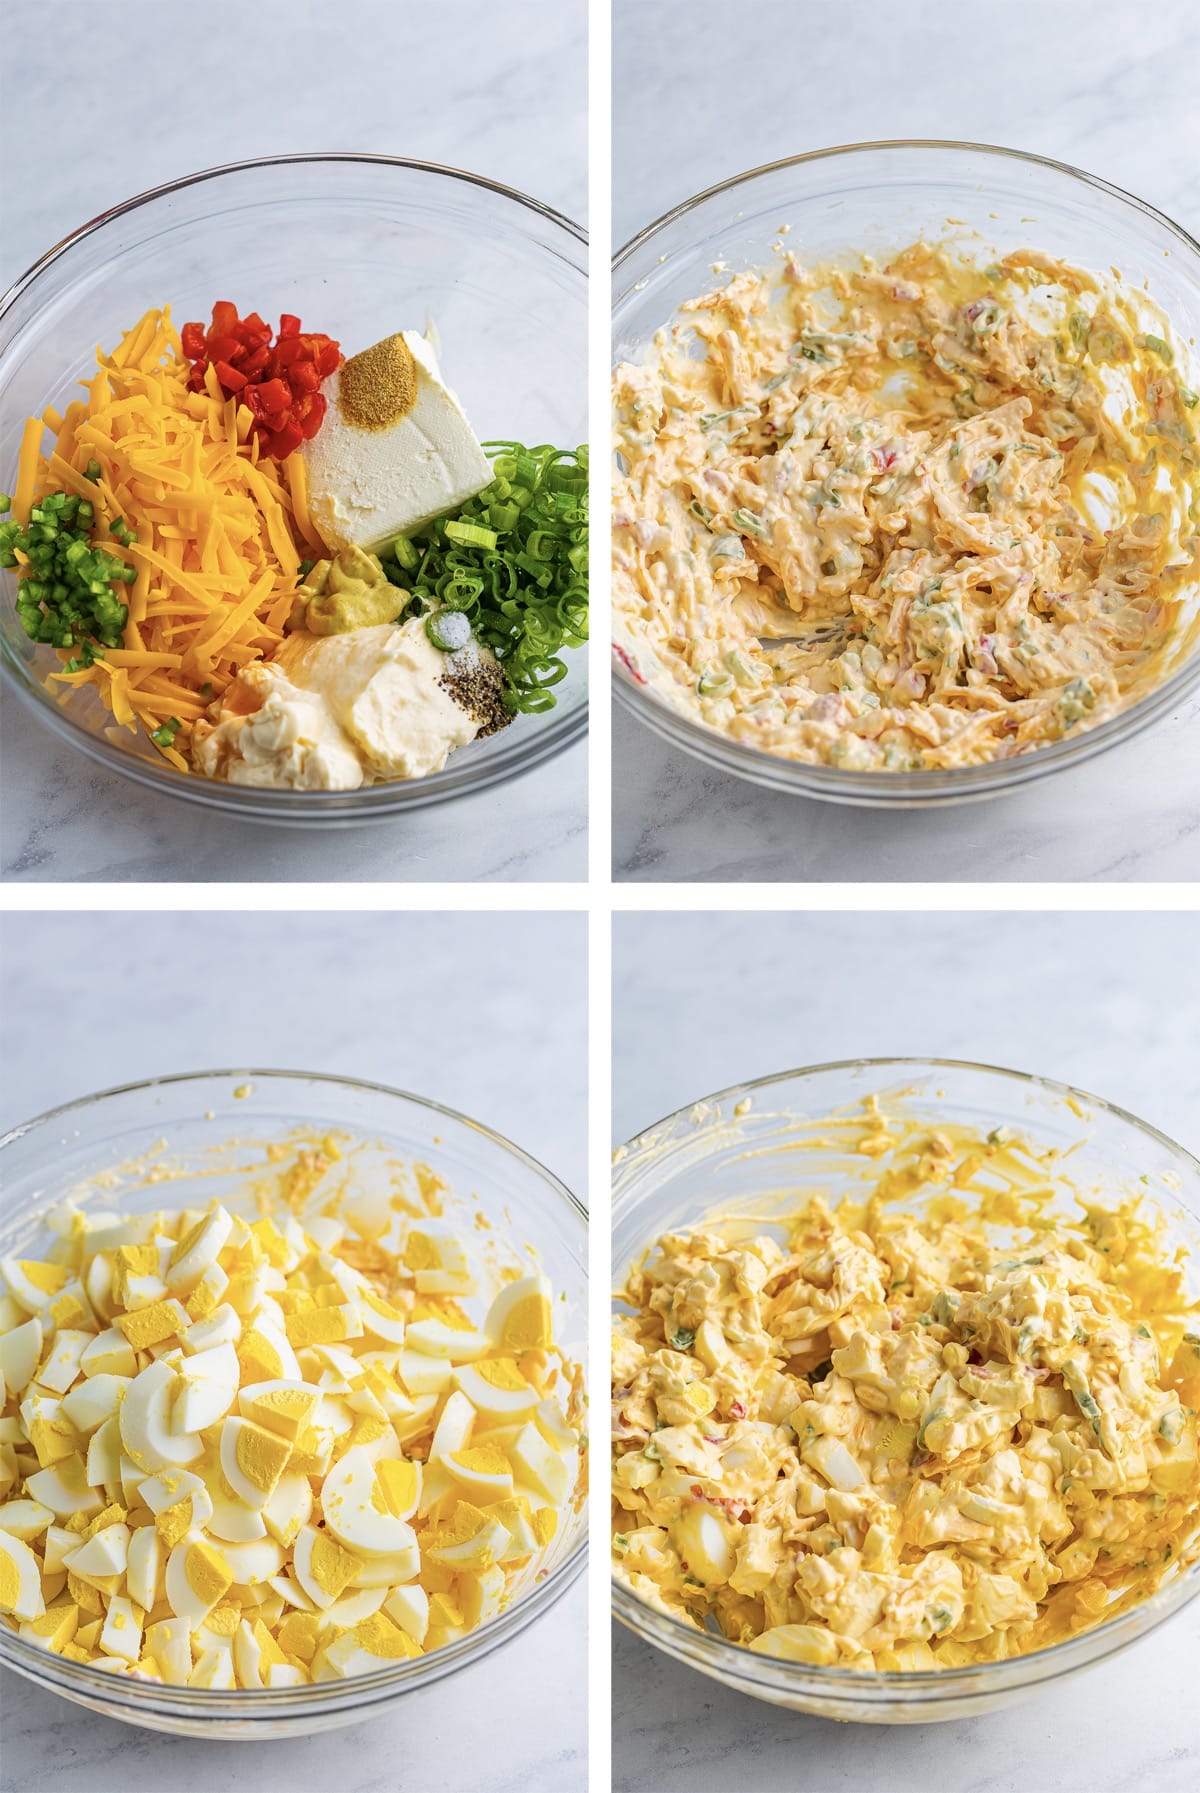 collage of images showing how to make the egg salad for Egg Salad Sandwiches